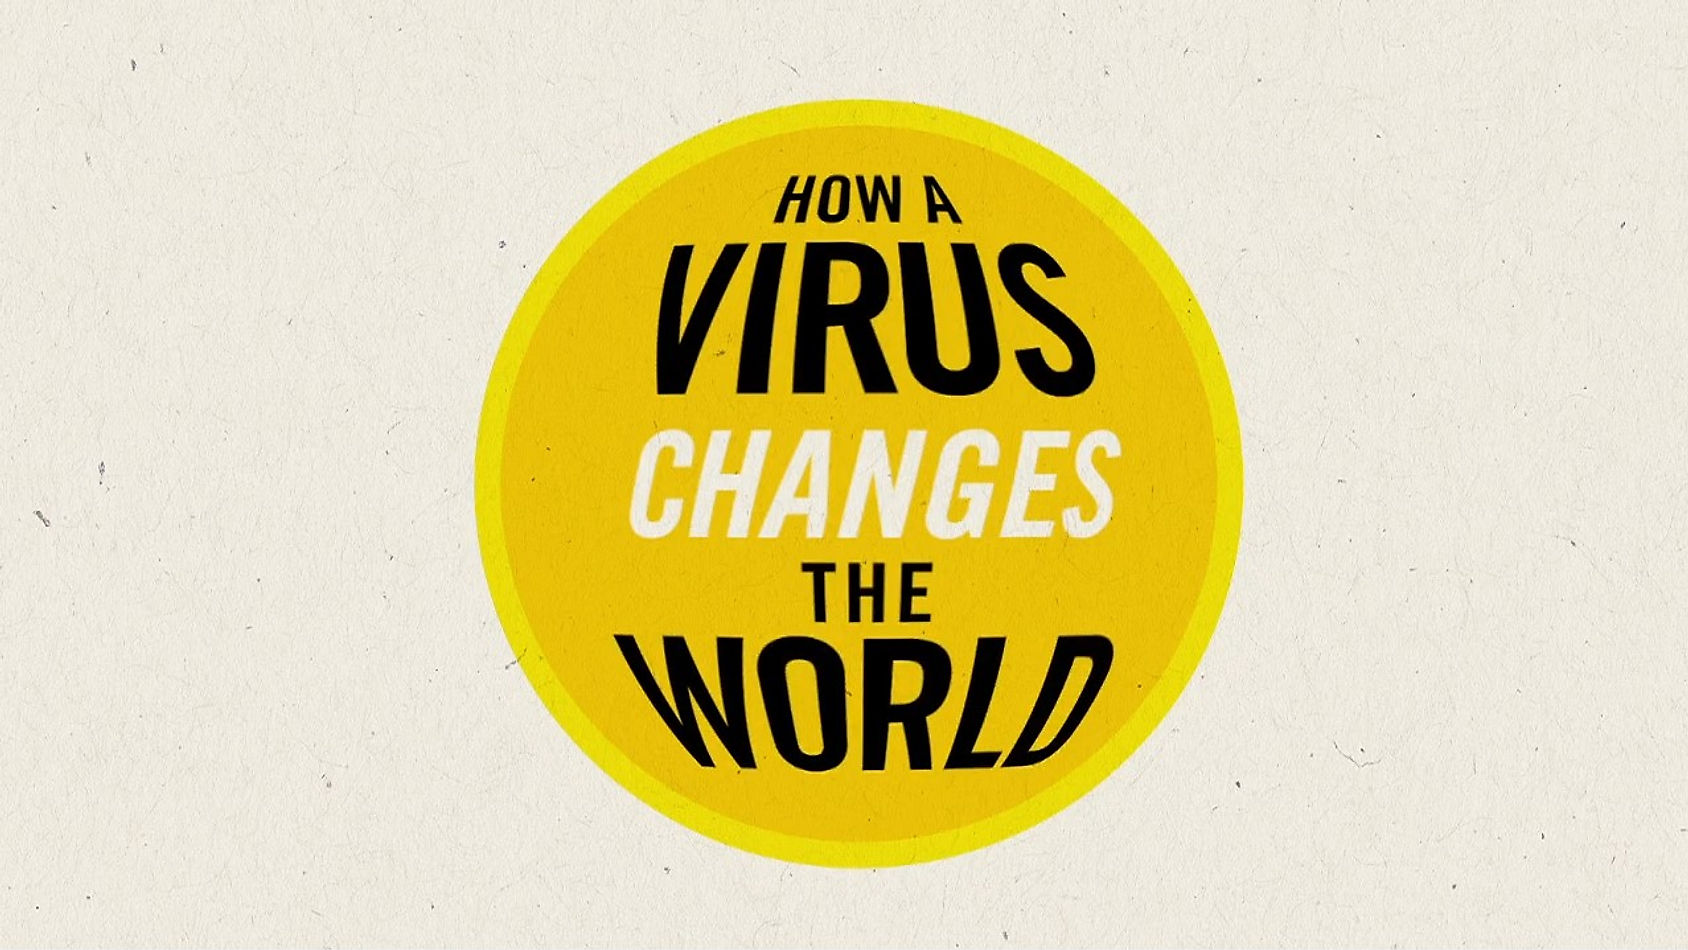 Contagion: How a Virus Changes the World